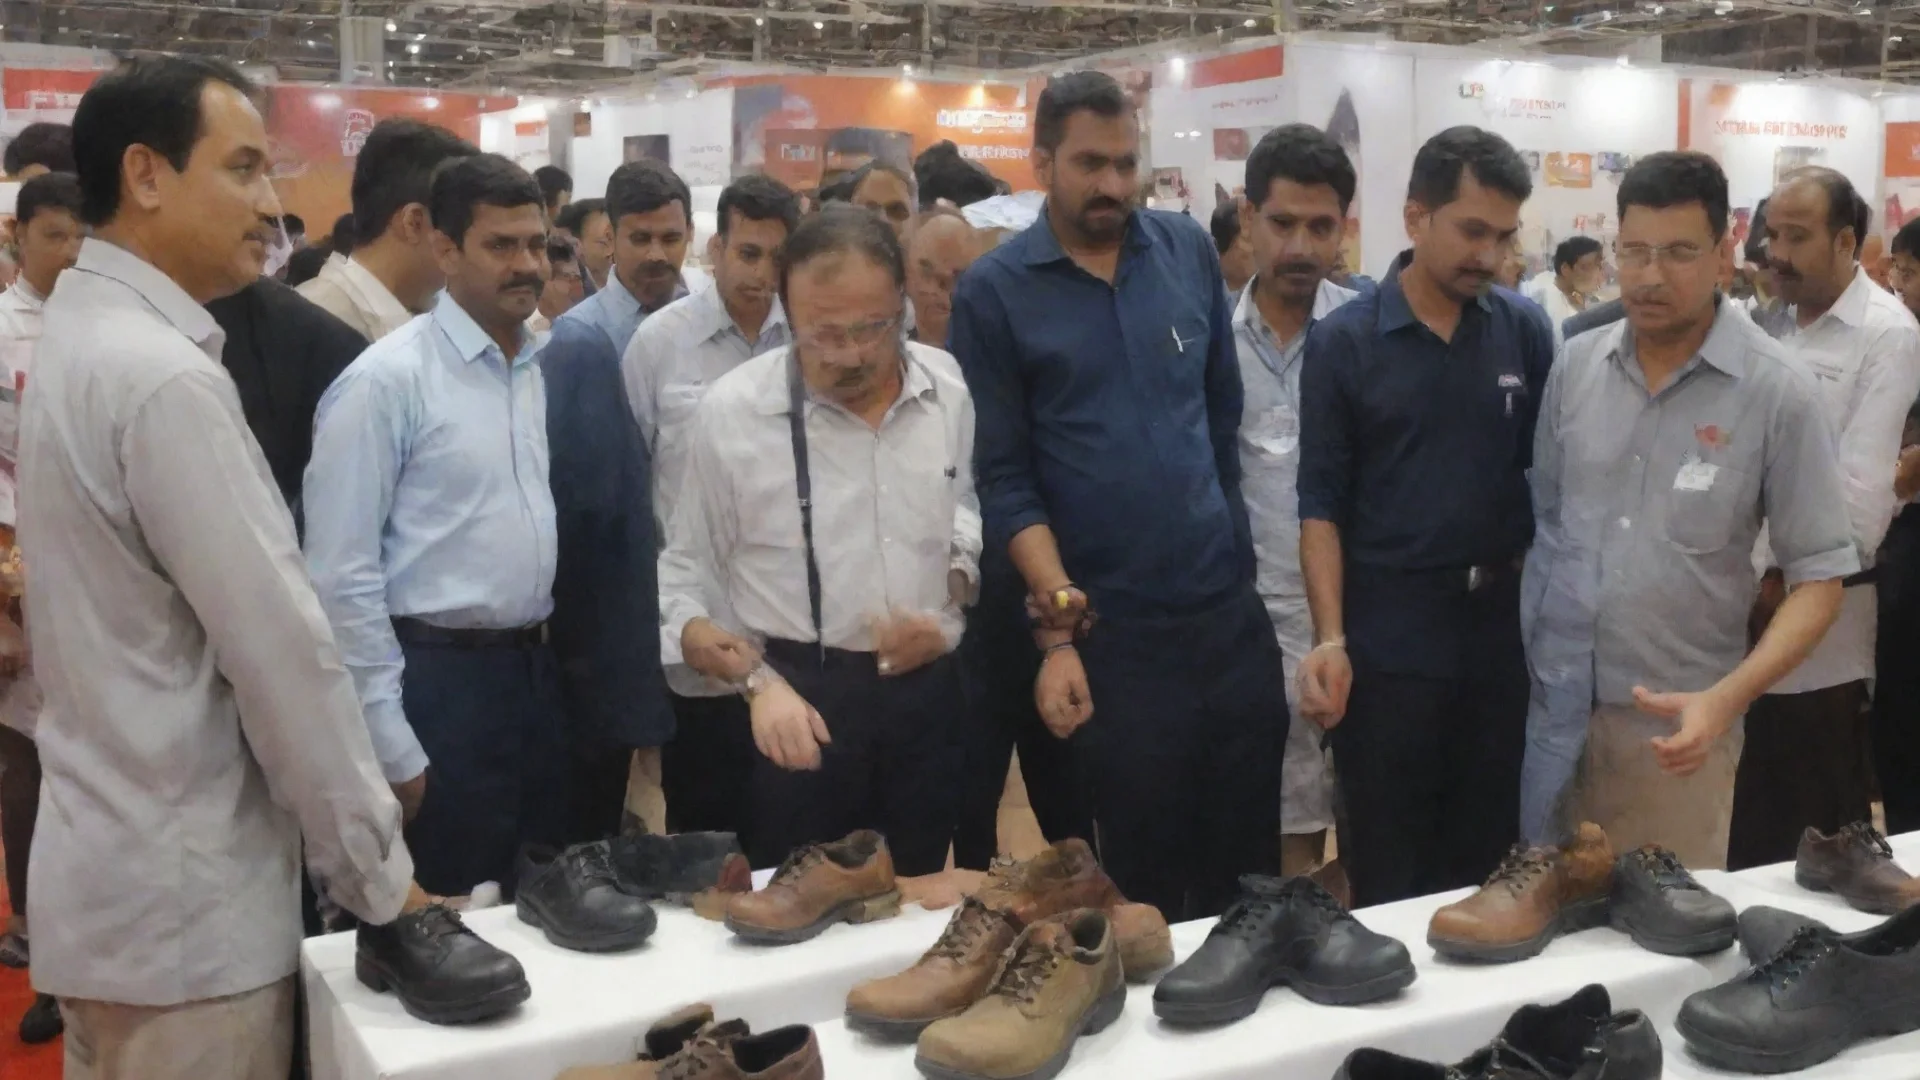 artstation art a safety footwear company staff showing there new safety shoes in an industrial expo to the people who visited there expo near there stall where safety shoes are kept confident engagi